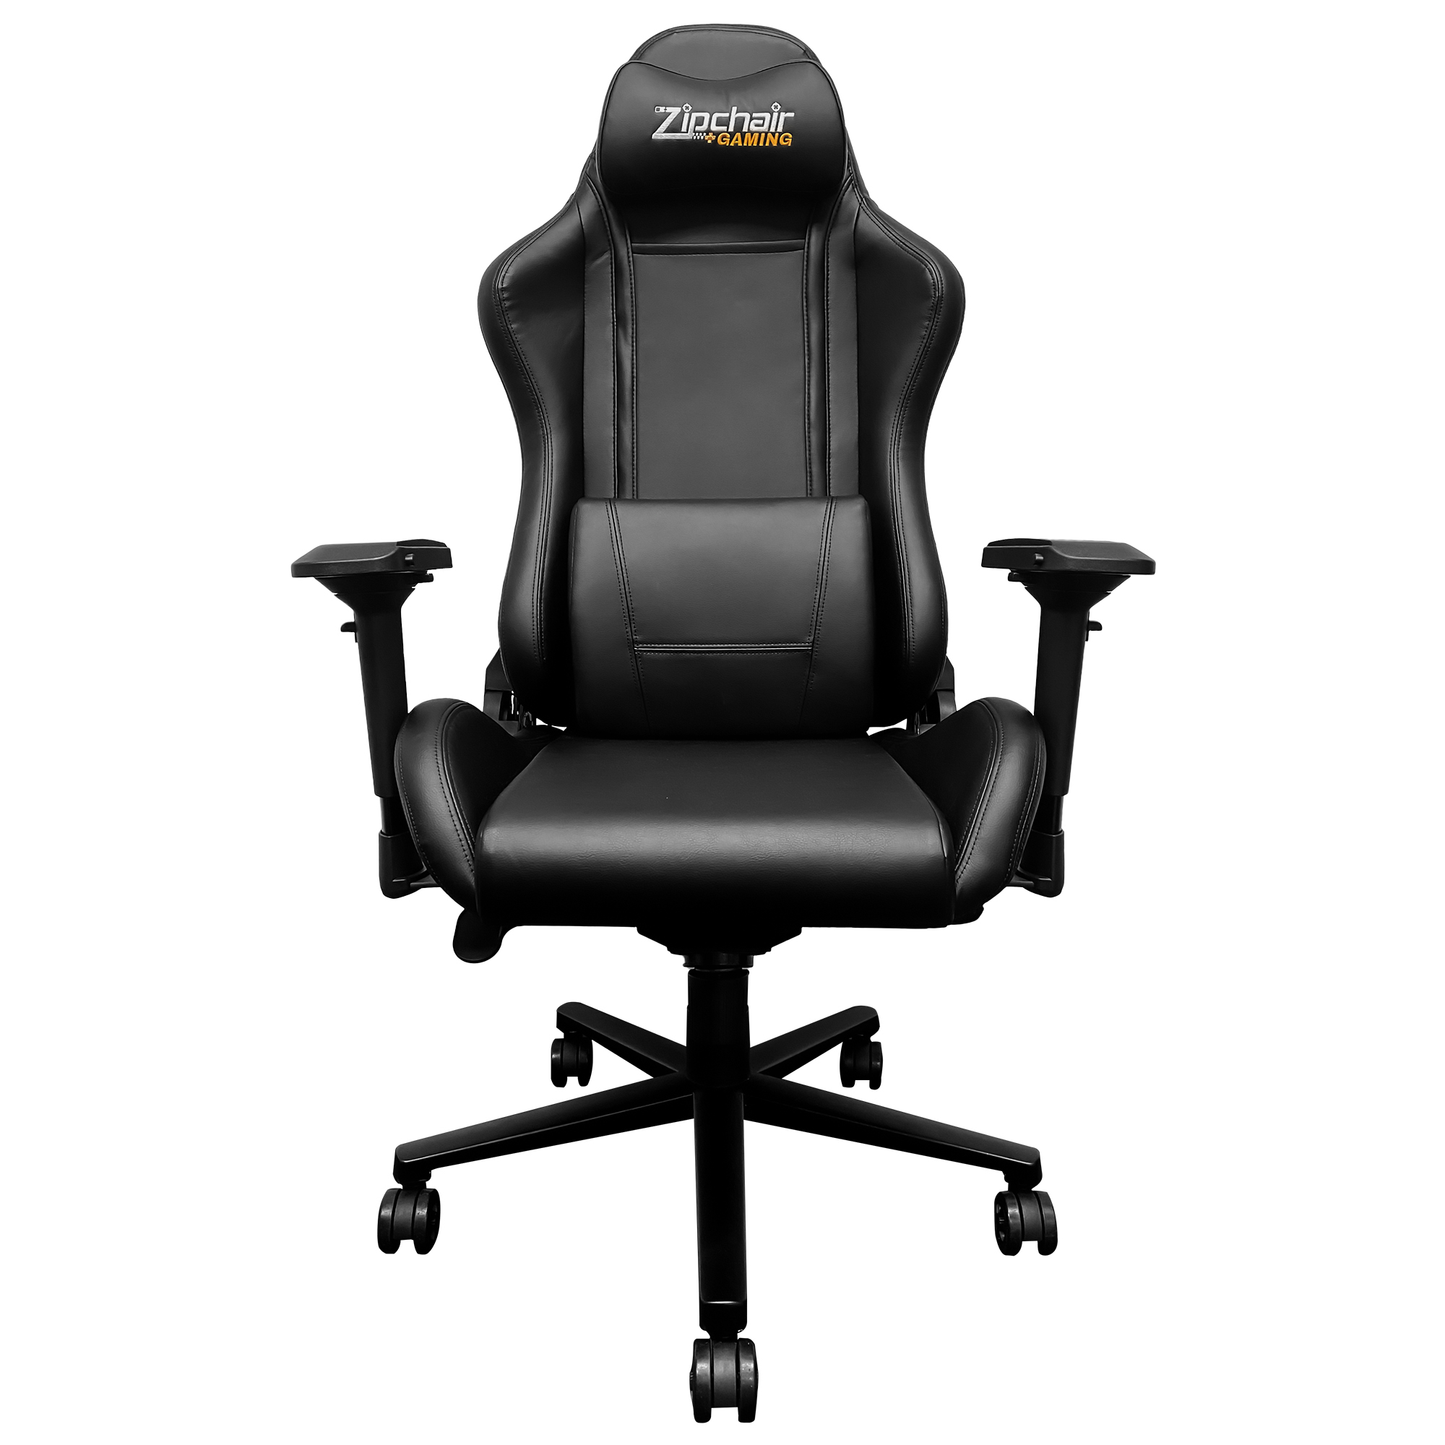 Xpression Pro Gaming Chair with Golden State Warriors Secondary Logo